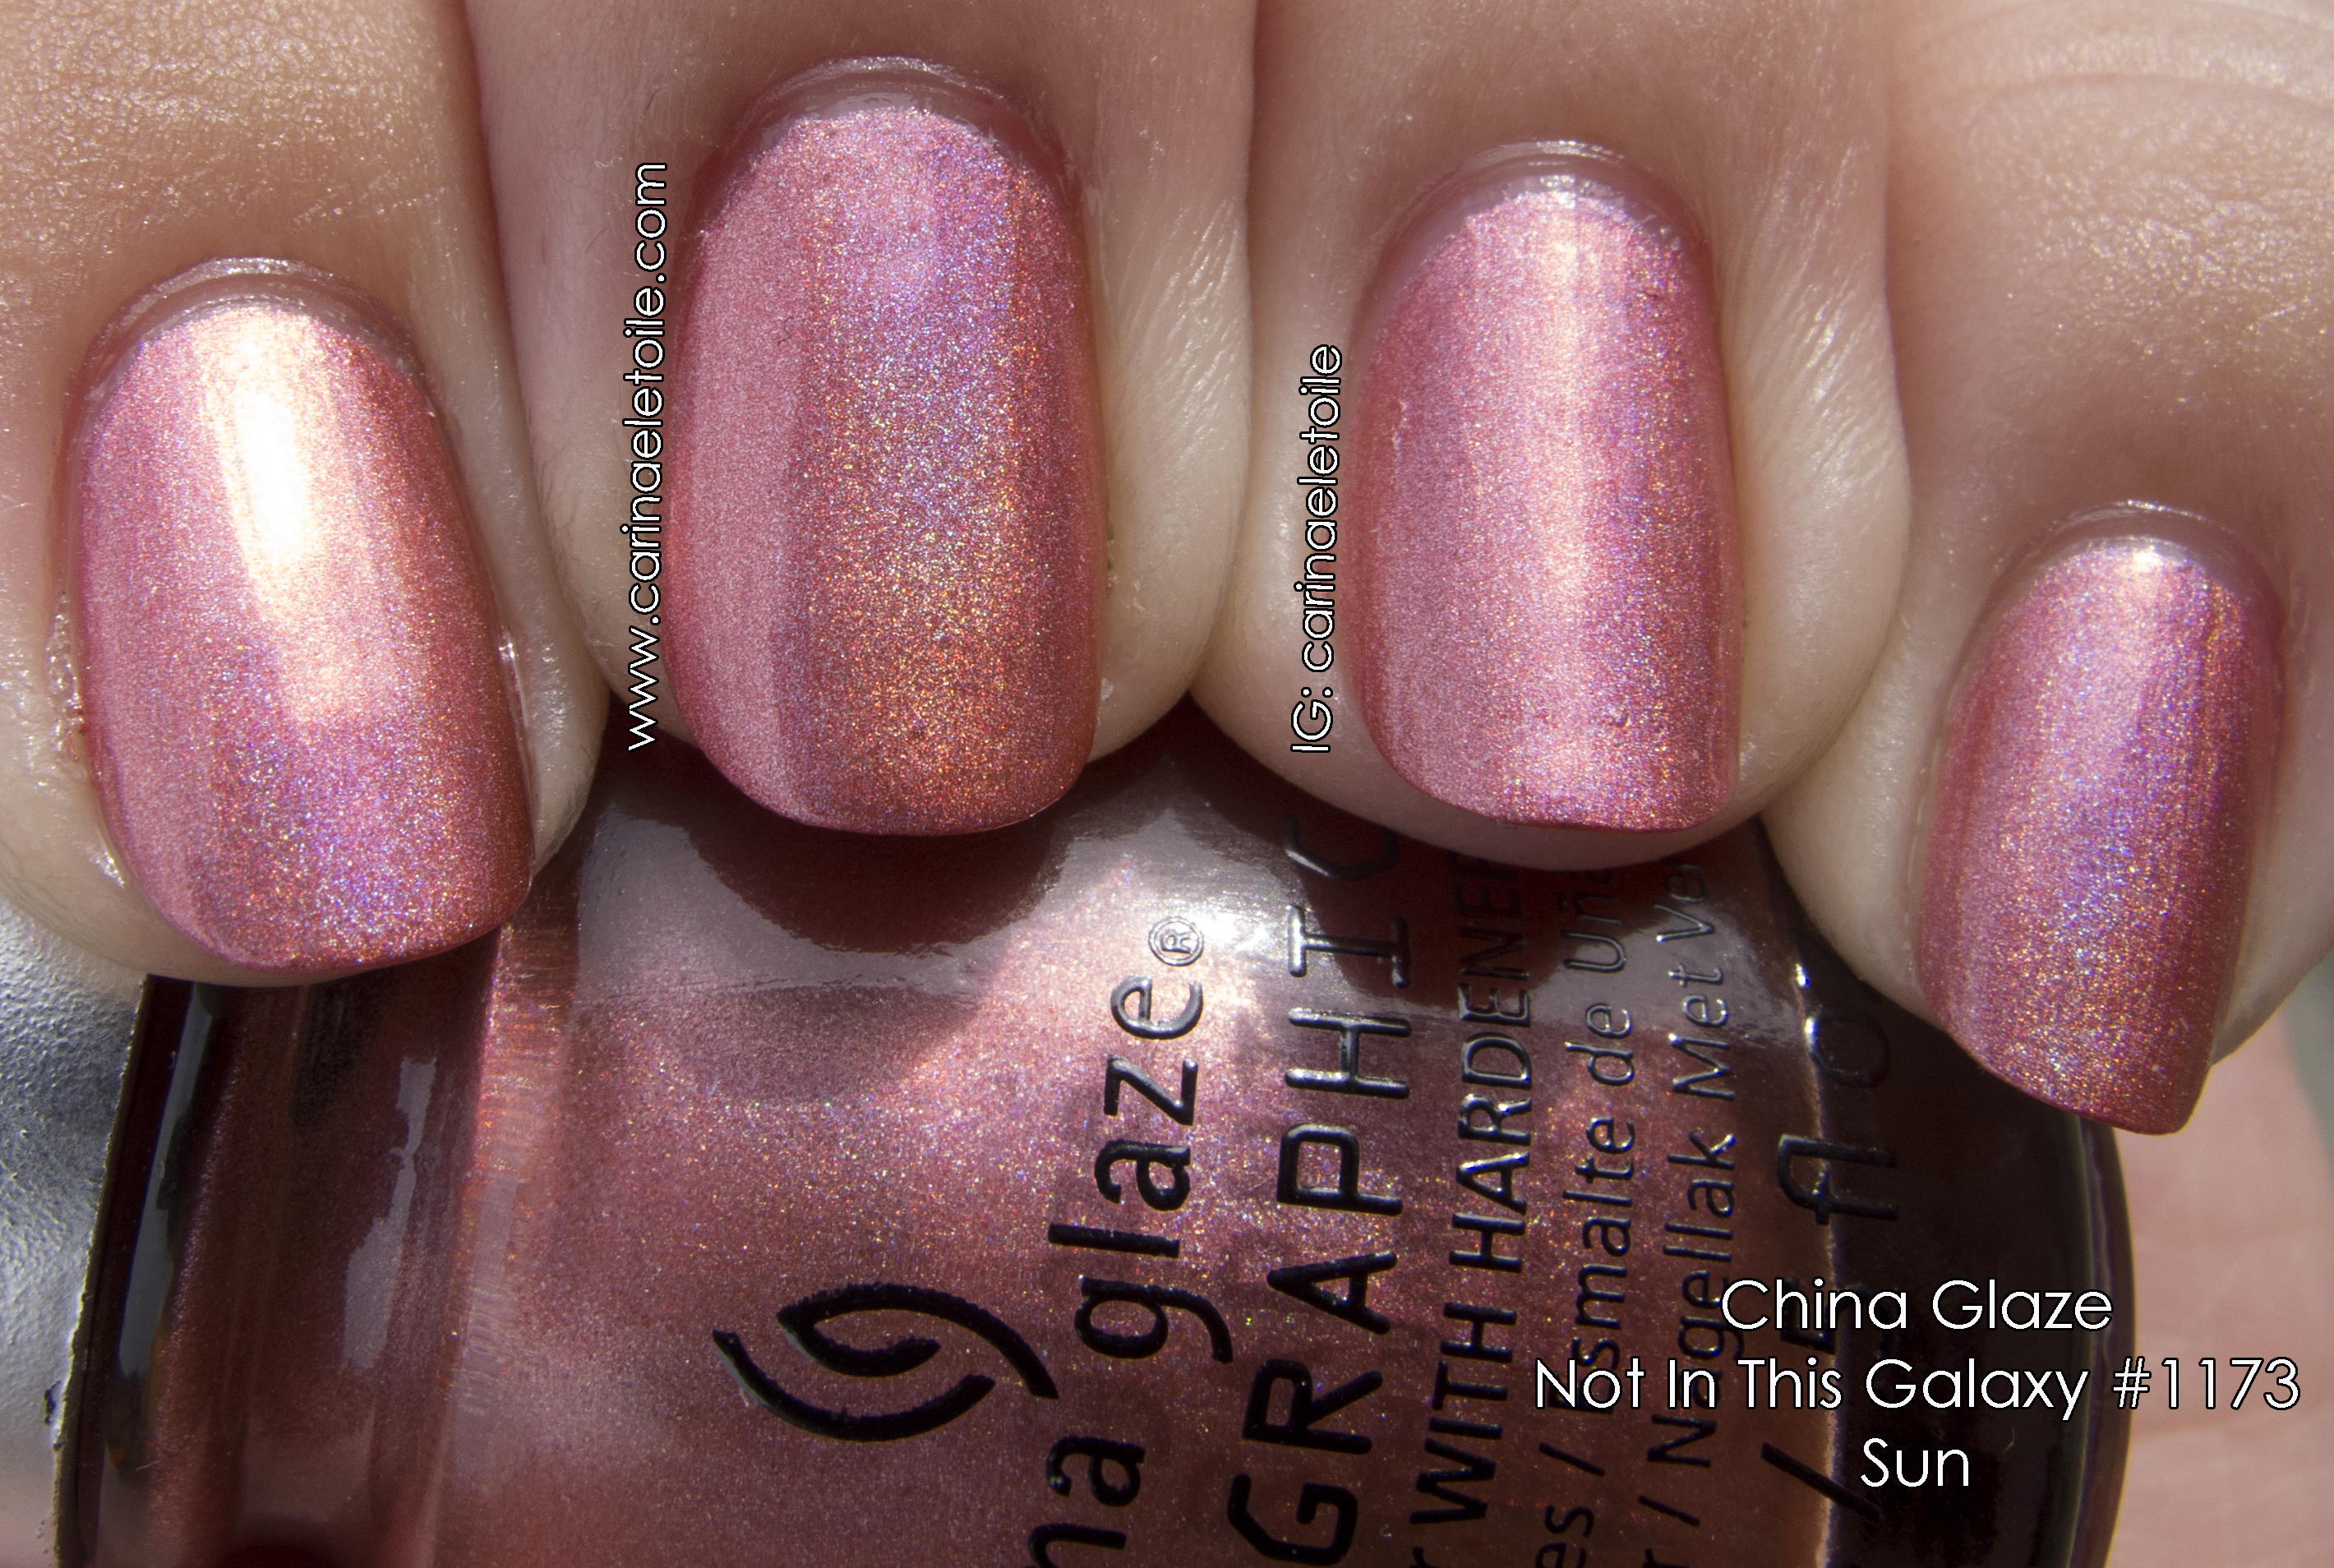 Not In This Galaxy the least out of the China Glaze Hologlam collection. 